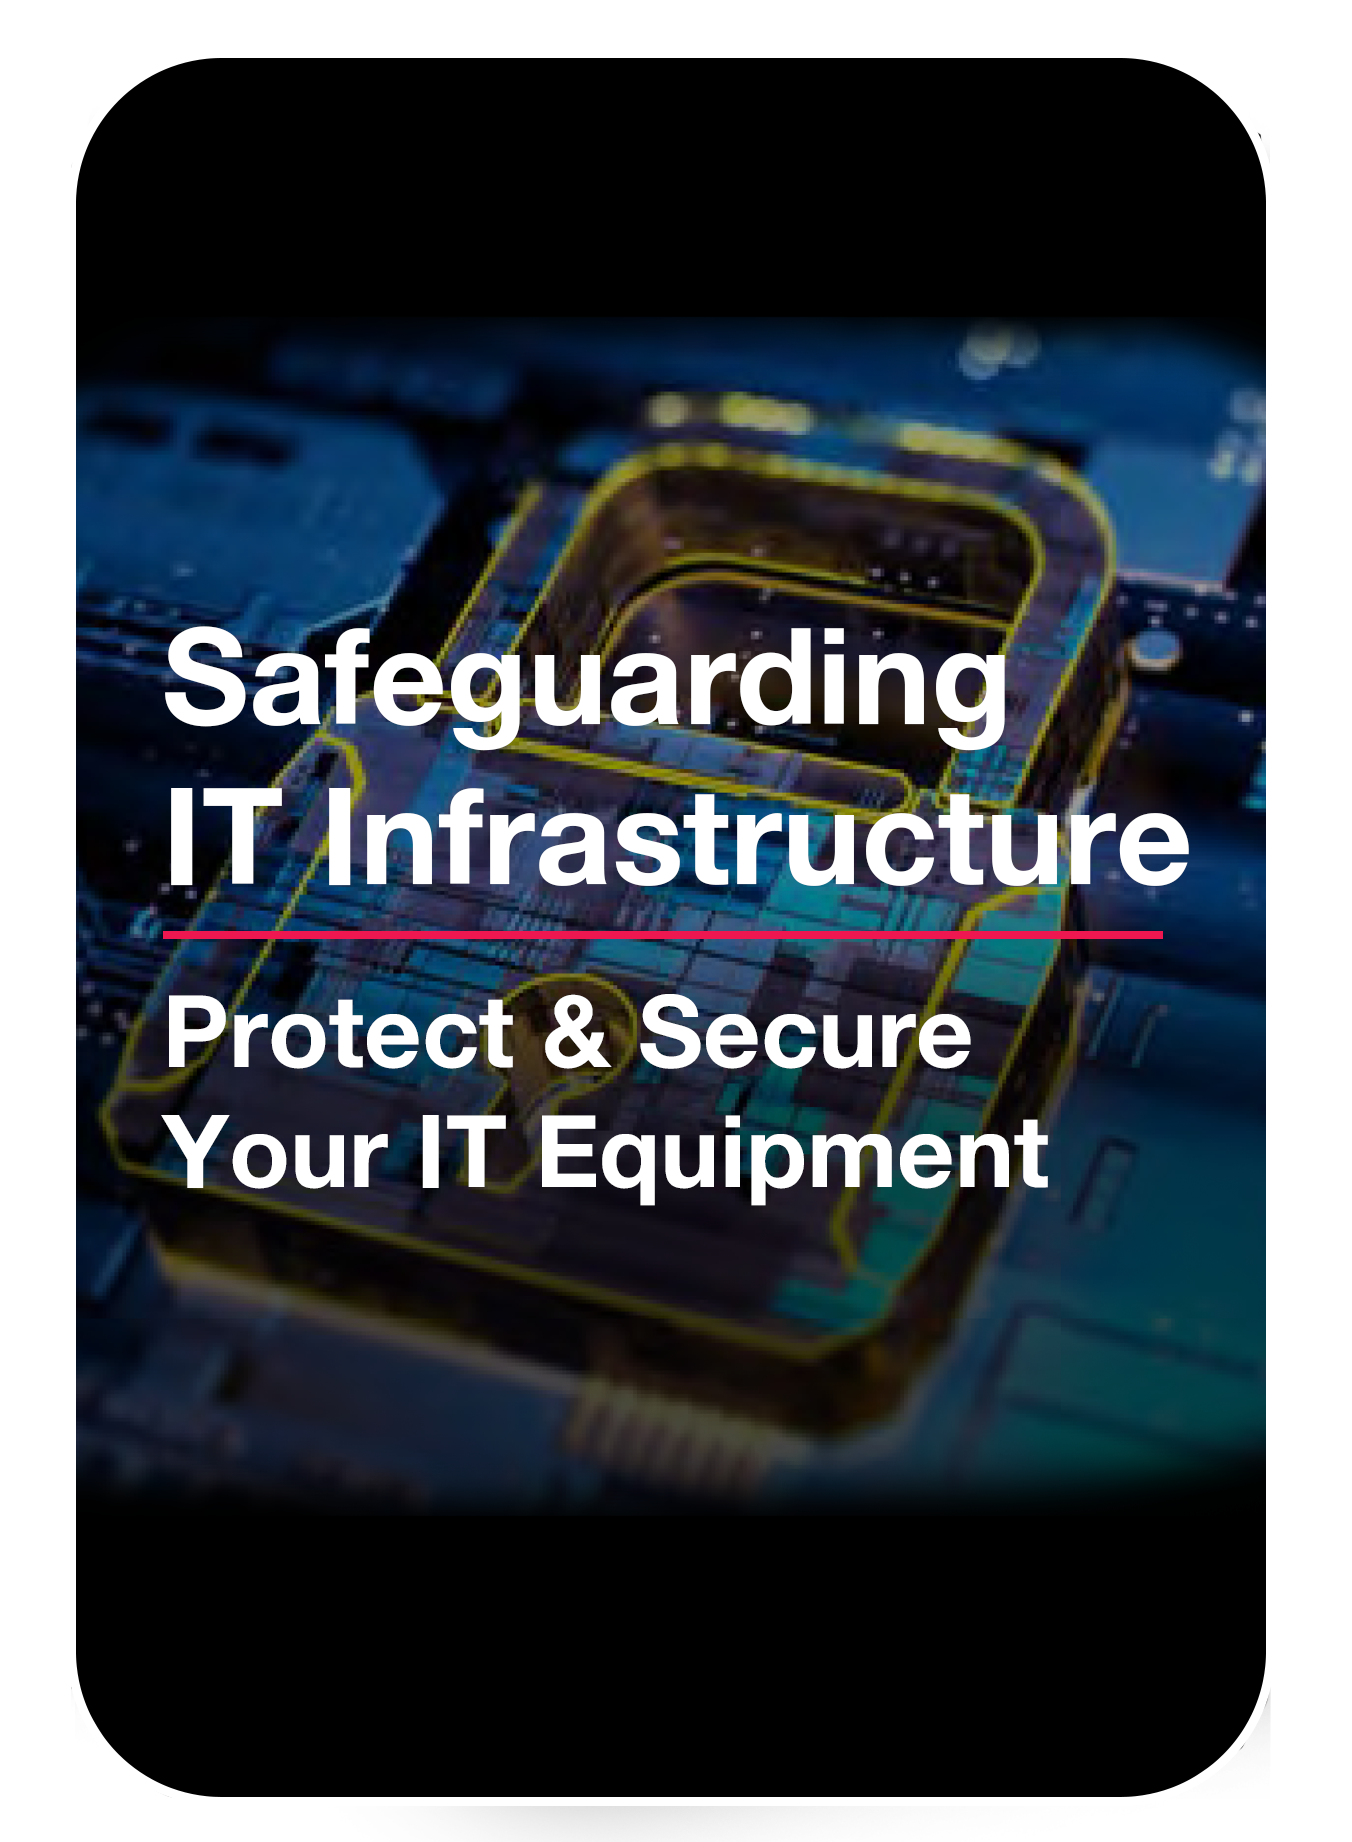 Safeguarding IT Infrastructure-1